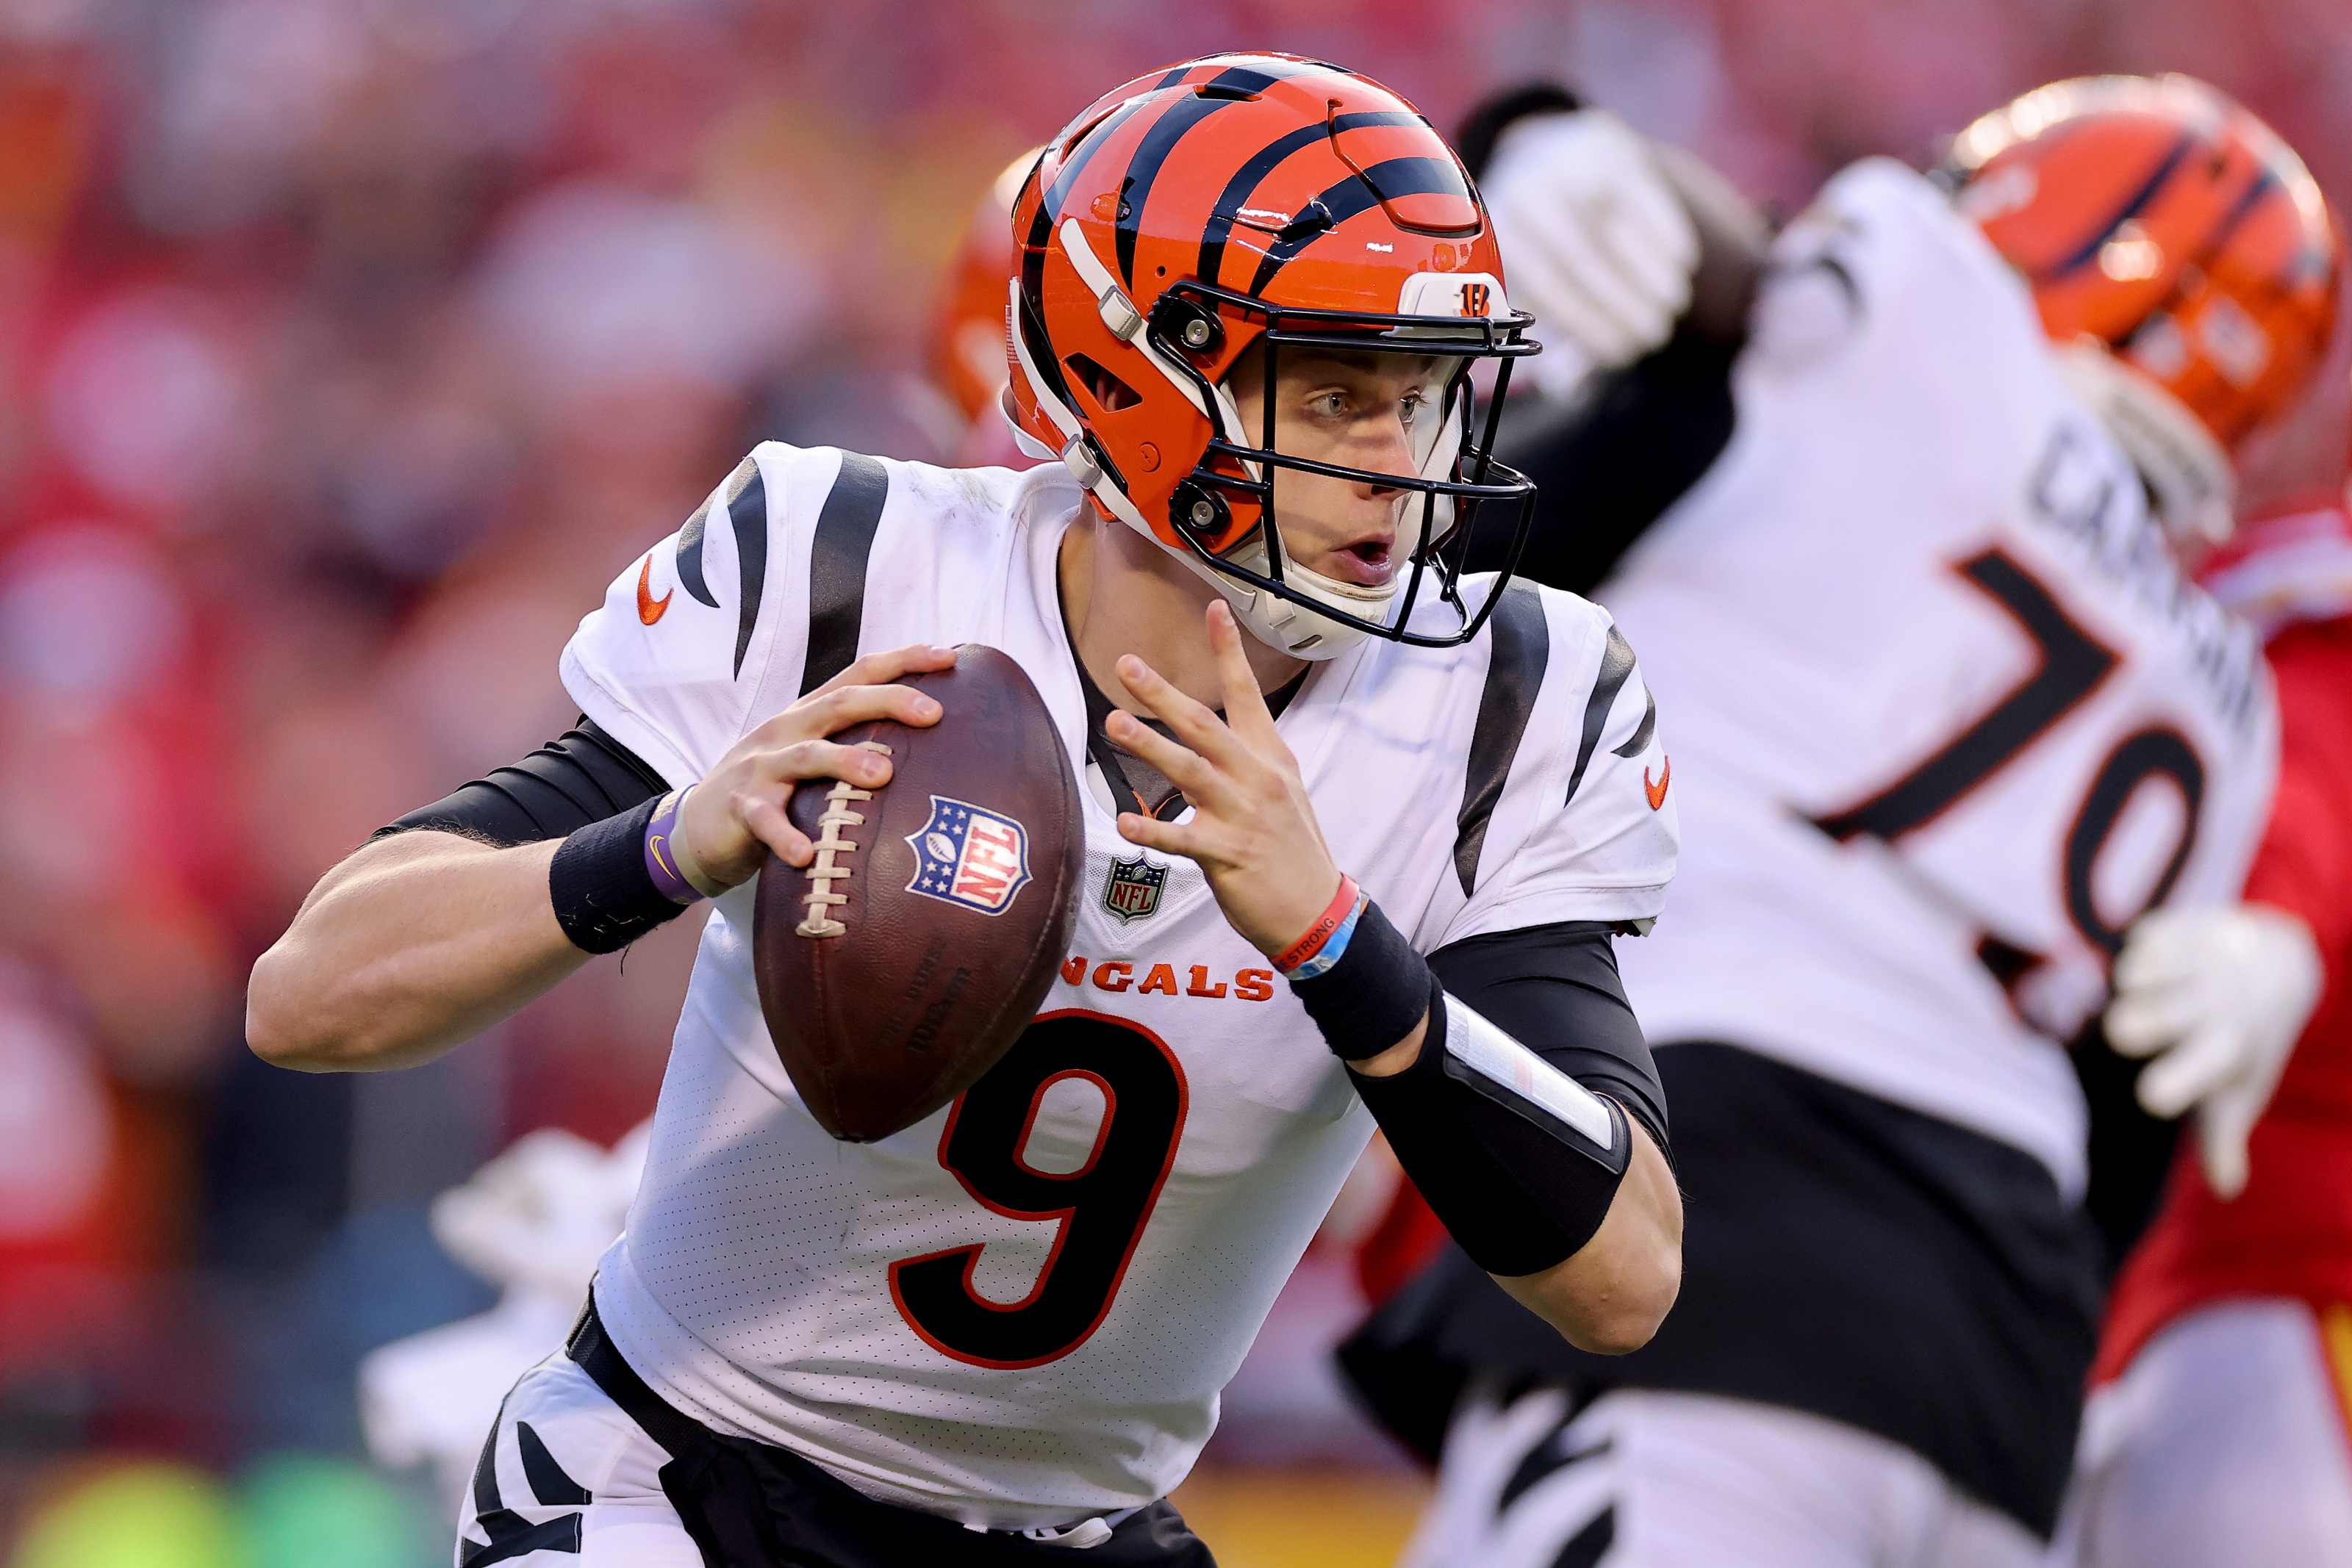 Joe Burrow trolled Alabama after leading Bengals to Super Bowl